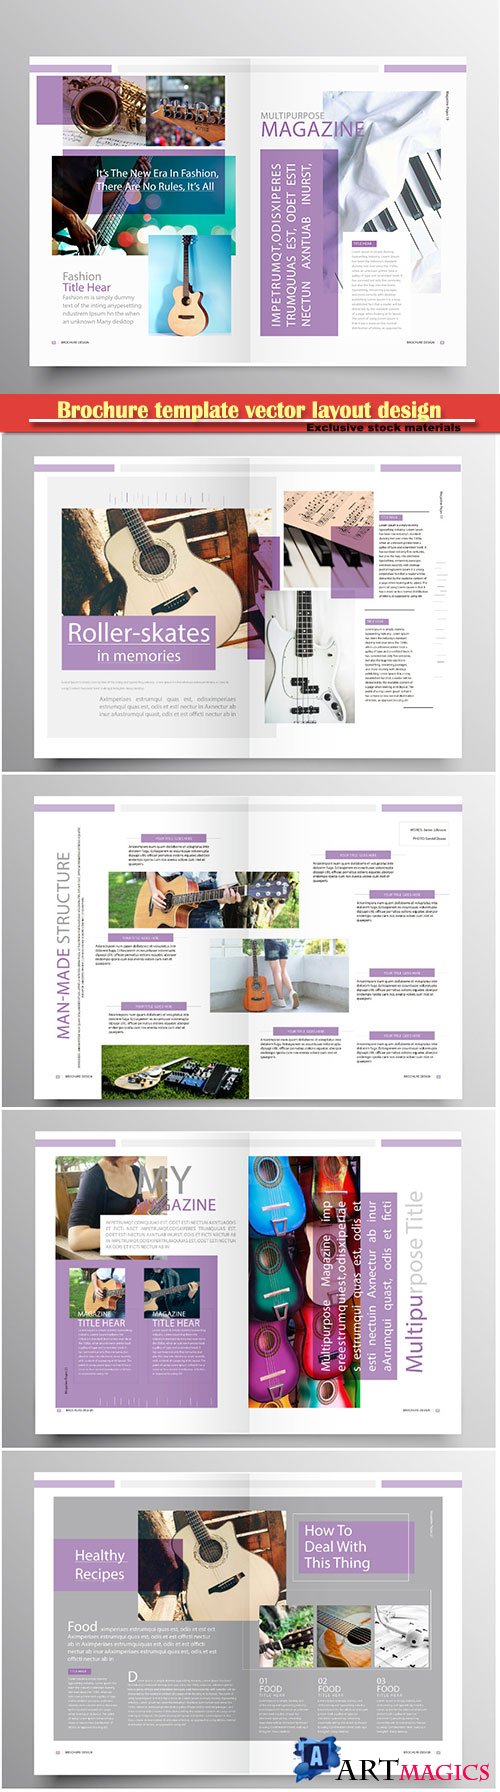 Brochure template vector layout design, corporate business annual report, magazine, flyer mockup # 182